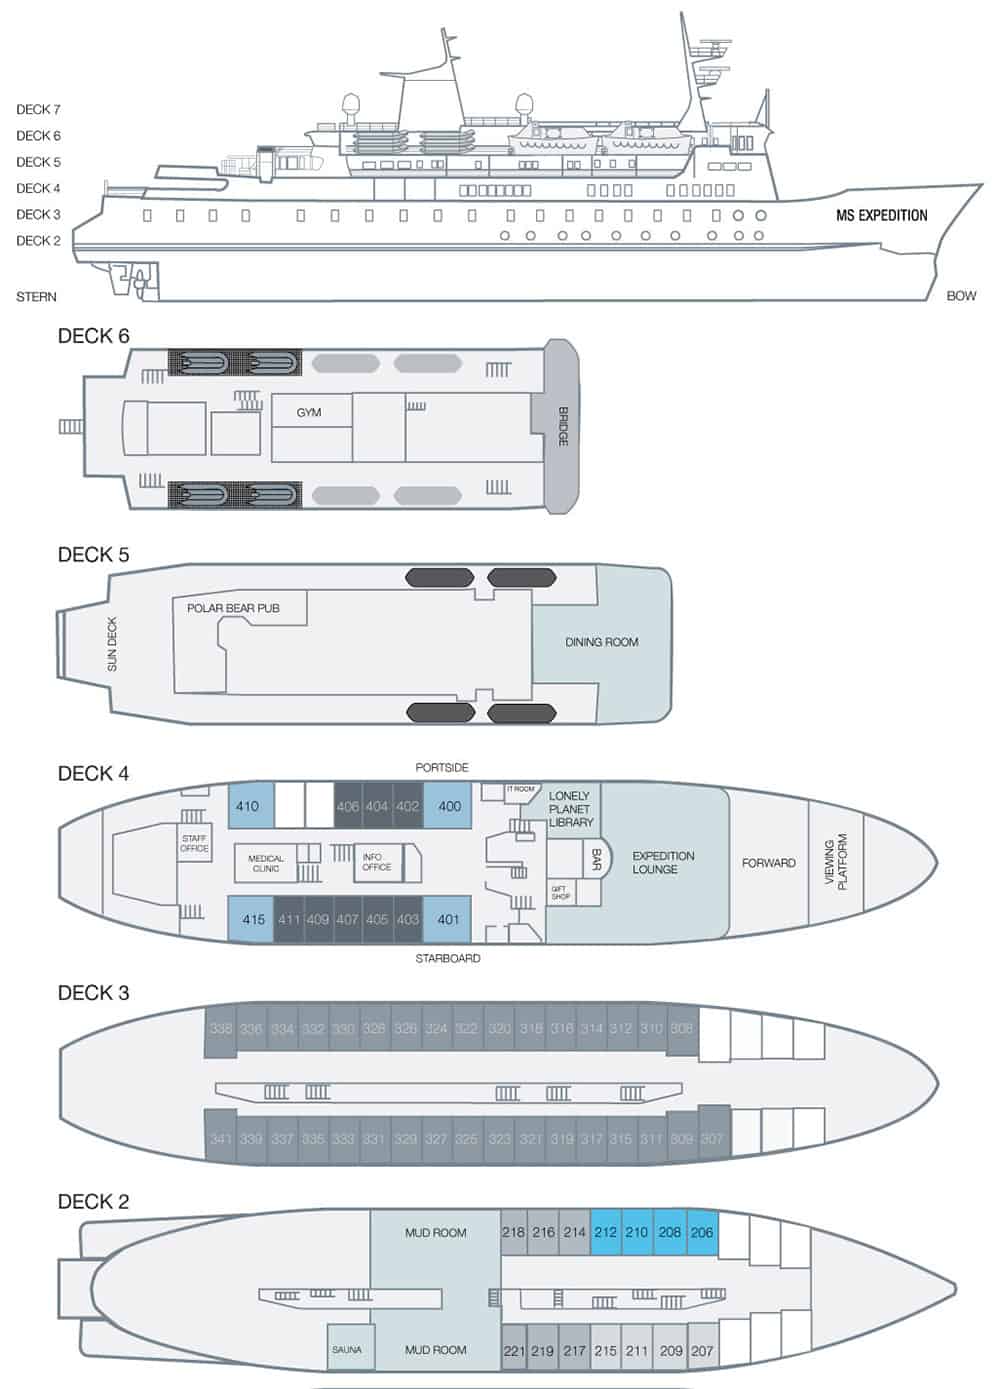 Deck plan of MS Expedition polar small ship with 5 passenger decks.